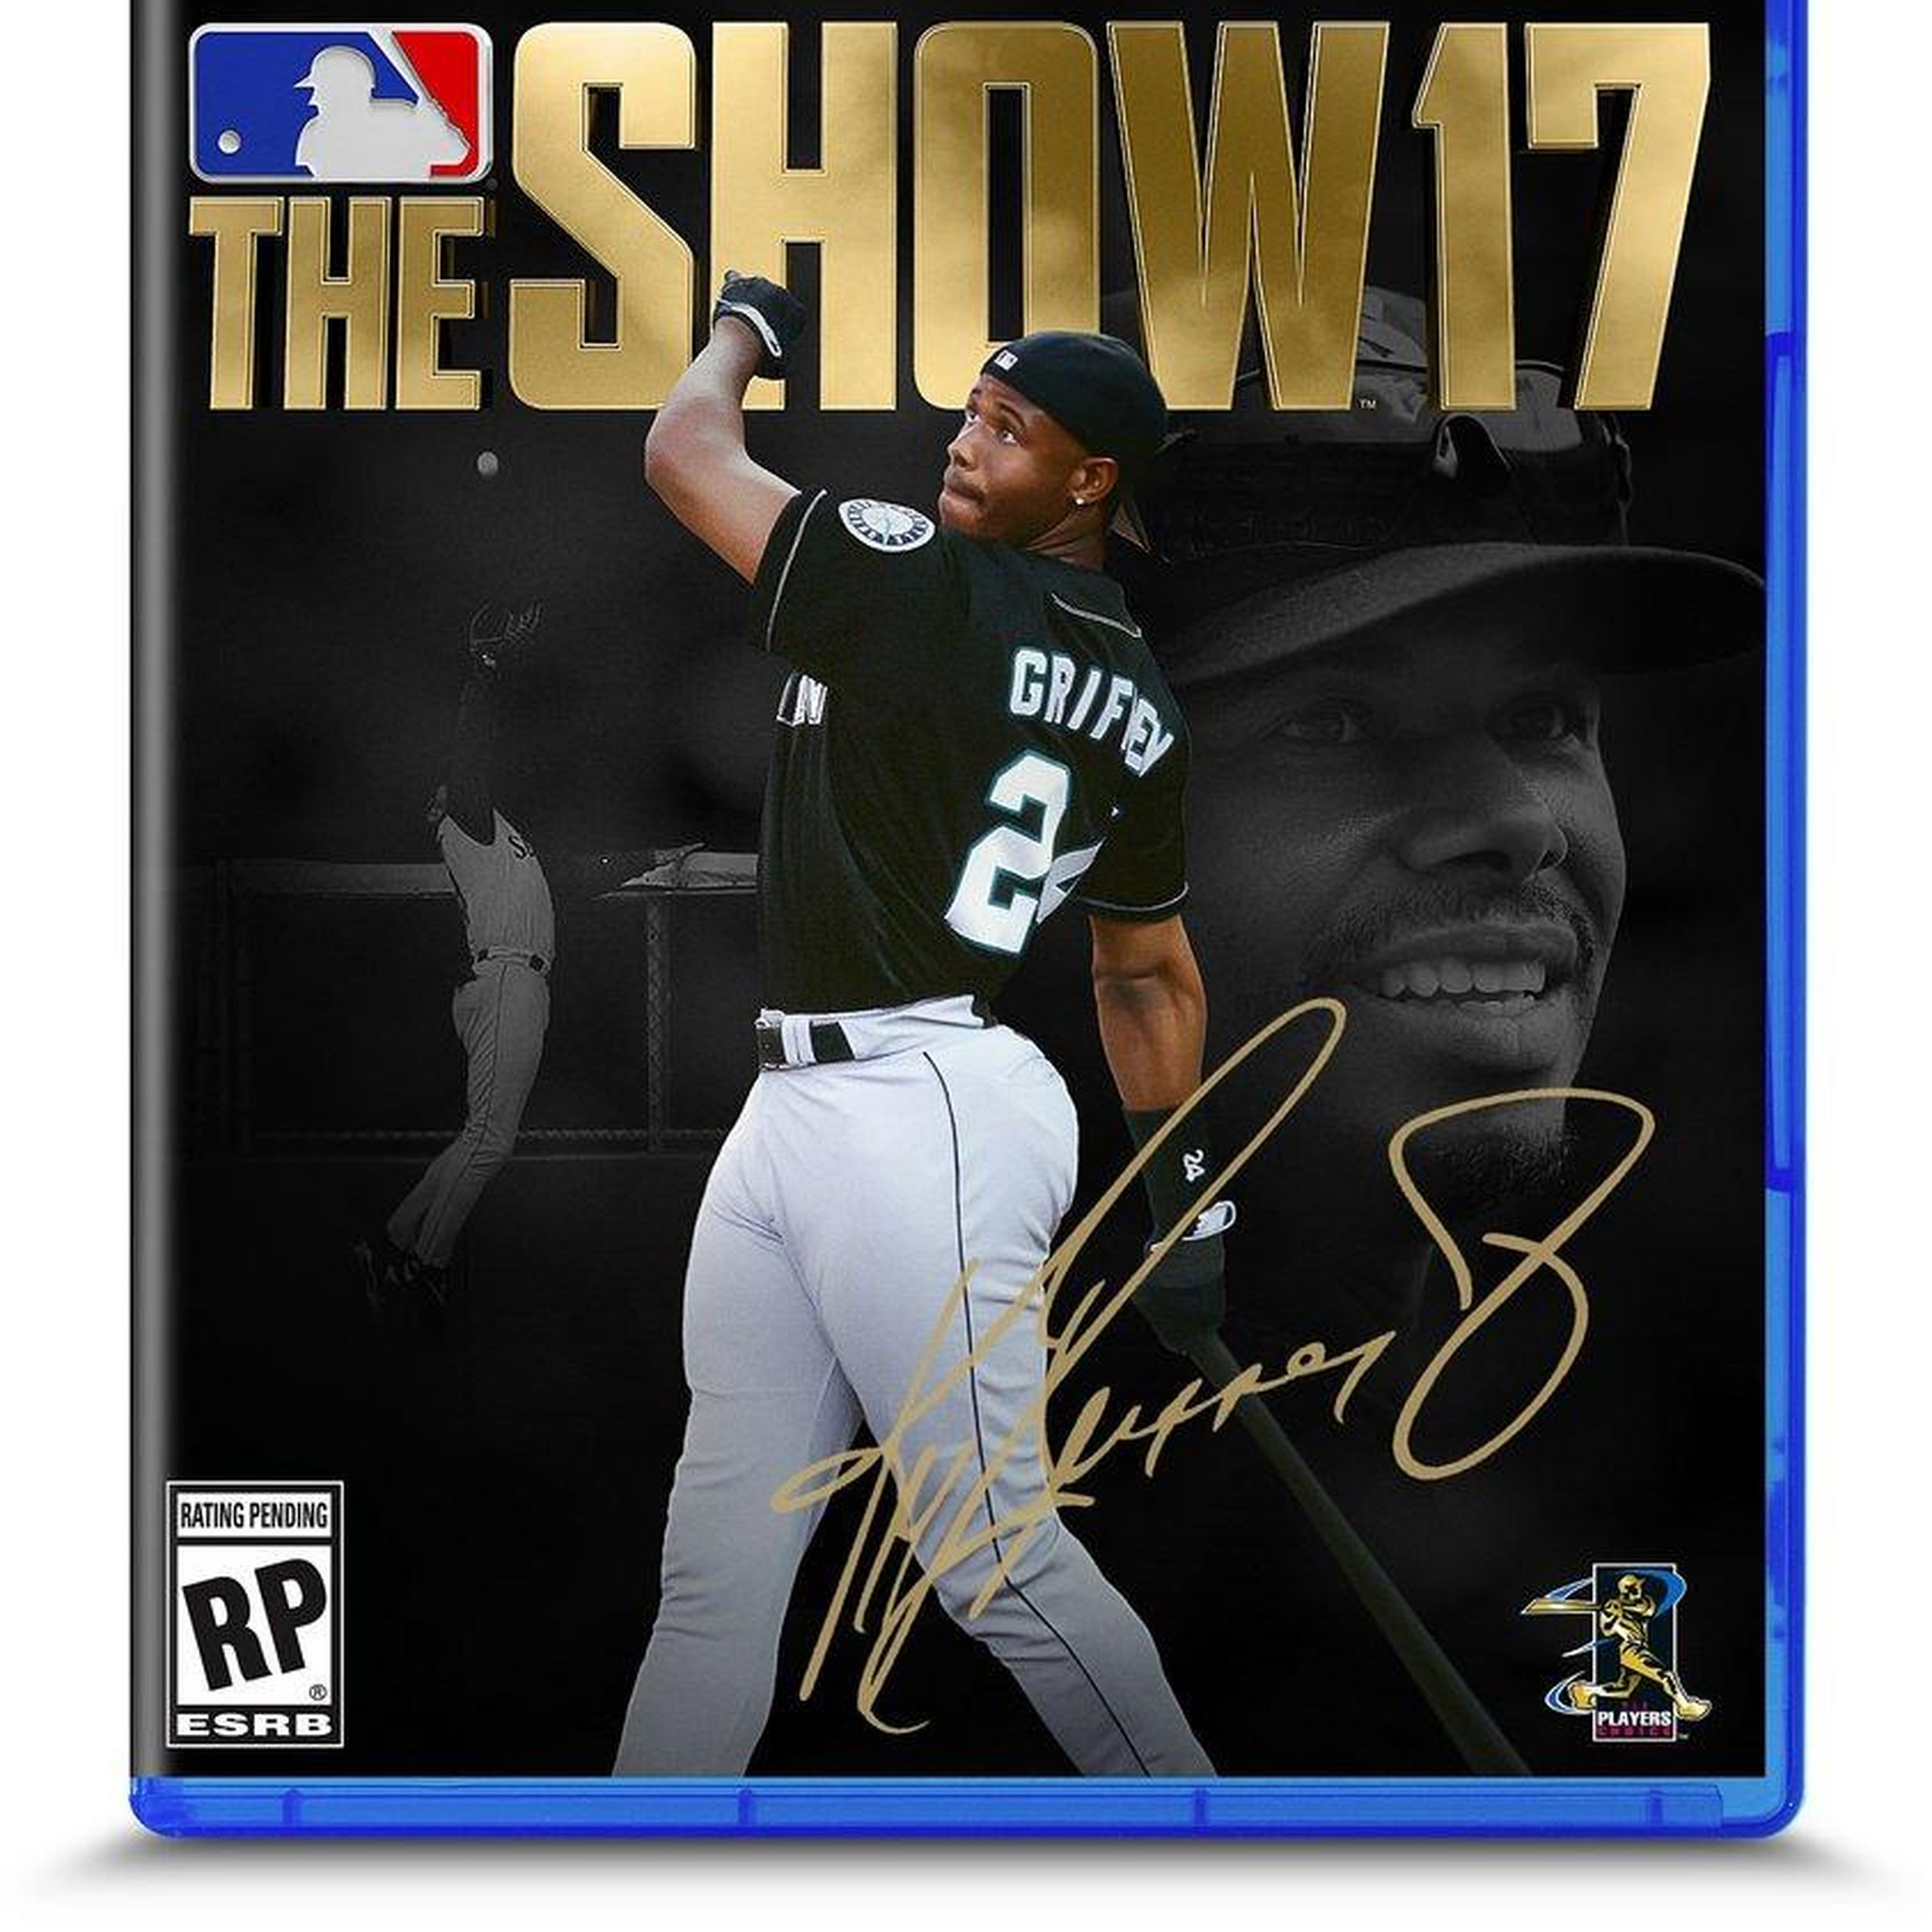 MLB The Show 17' Release Date Set And Ken Griffey Jr. Announced As